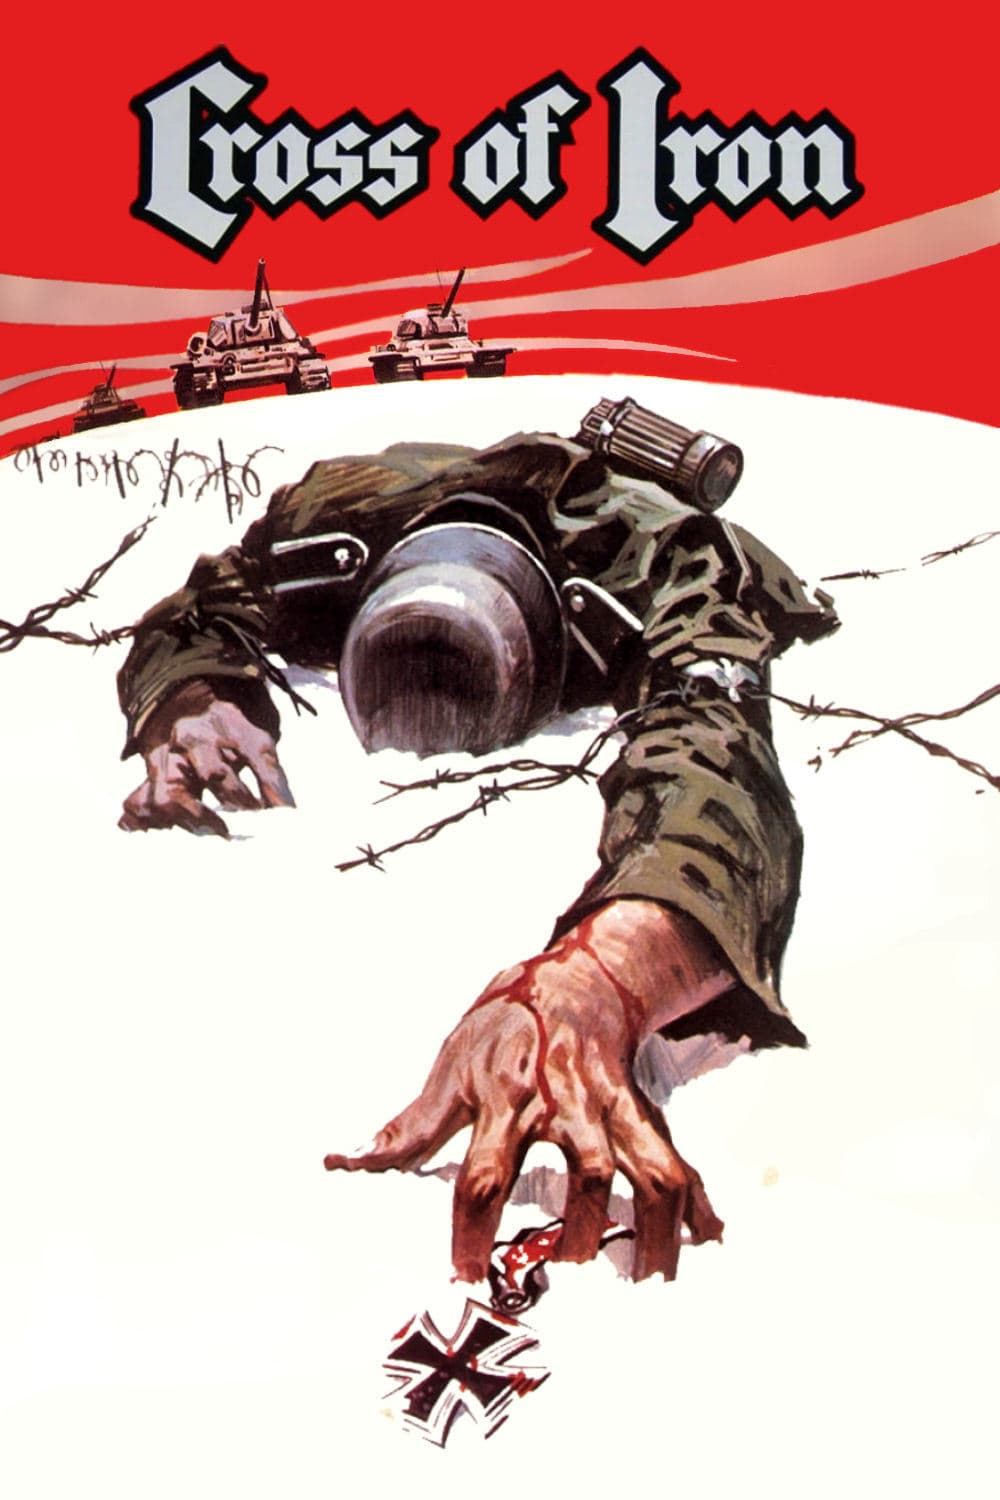 Poster for the movie "Cross of Iron"